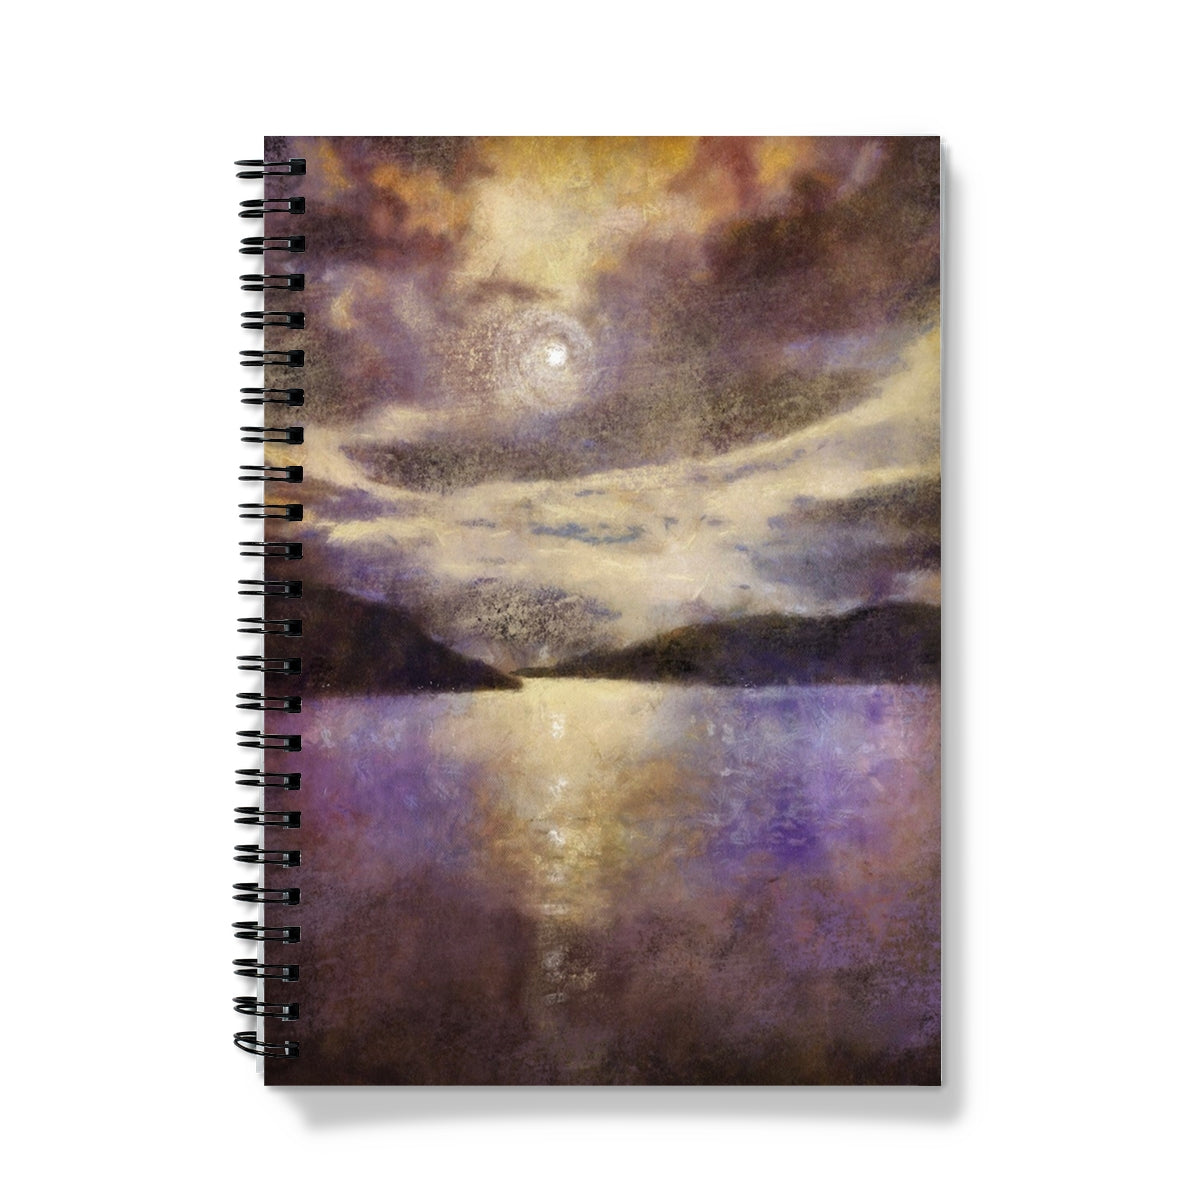 Moonlight Meets Lewis & Harris Art Gifts Notebook-Journals & Notebooks-Hebridean Islands Art Gallery-A4-Lined-Paintings, Prints, Homeware, Art Gifts From Scotland By Scottish Artist Kevin Hunter